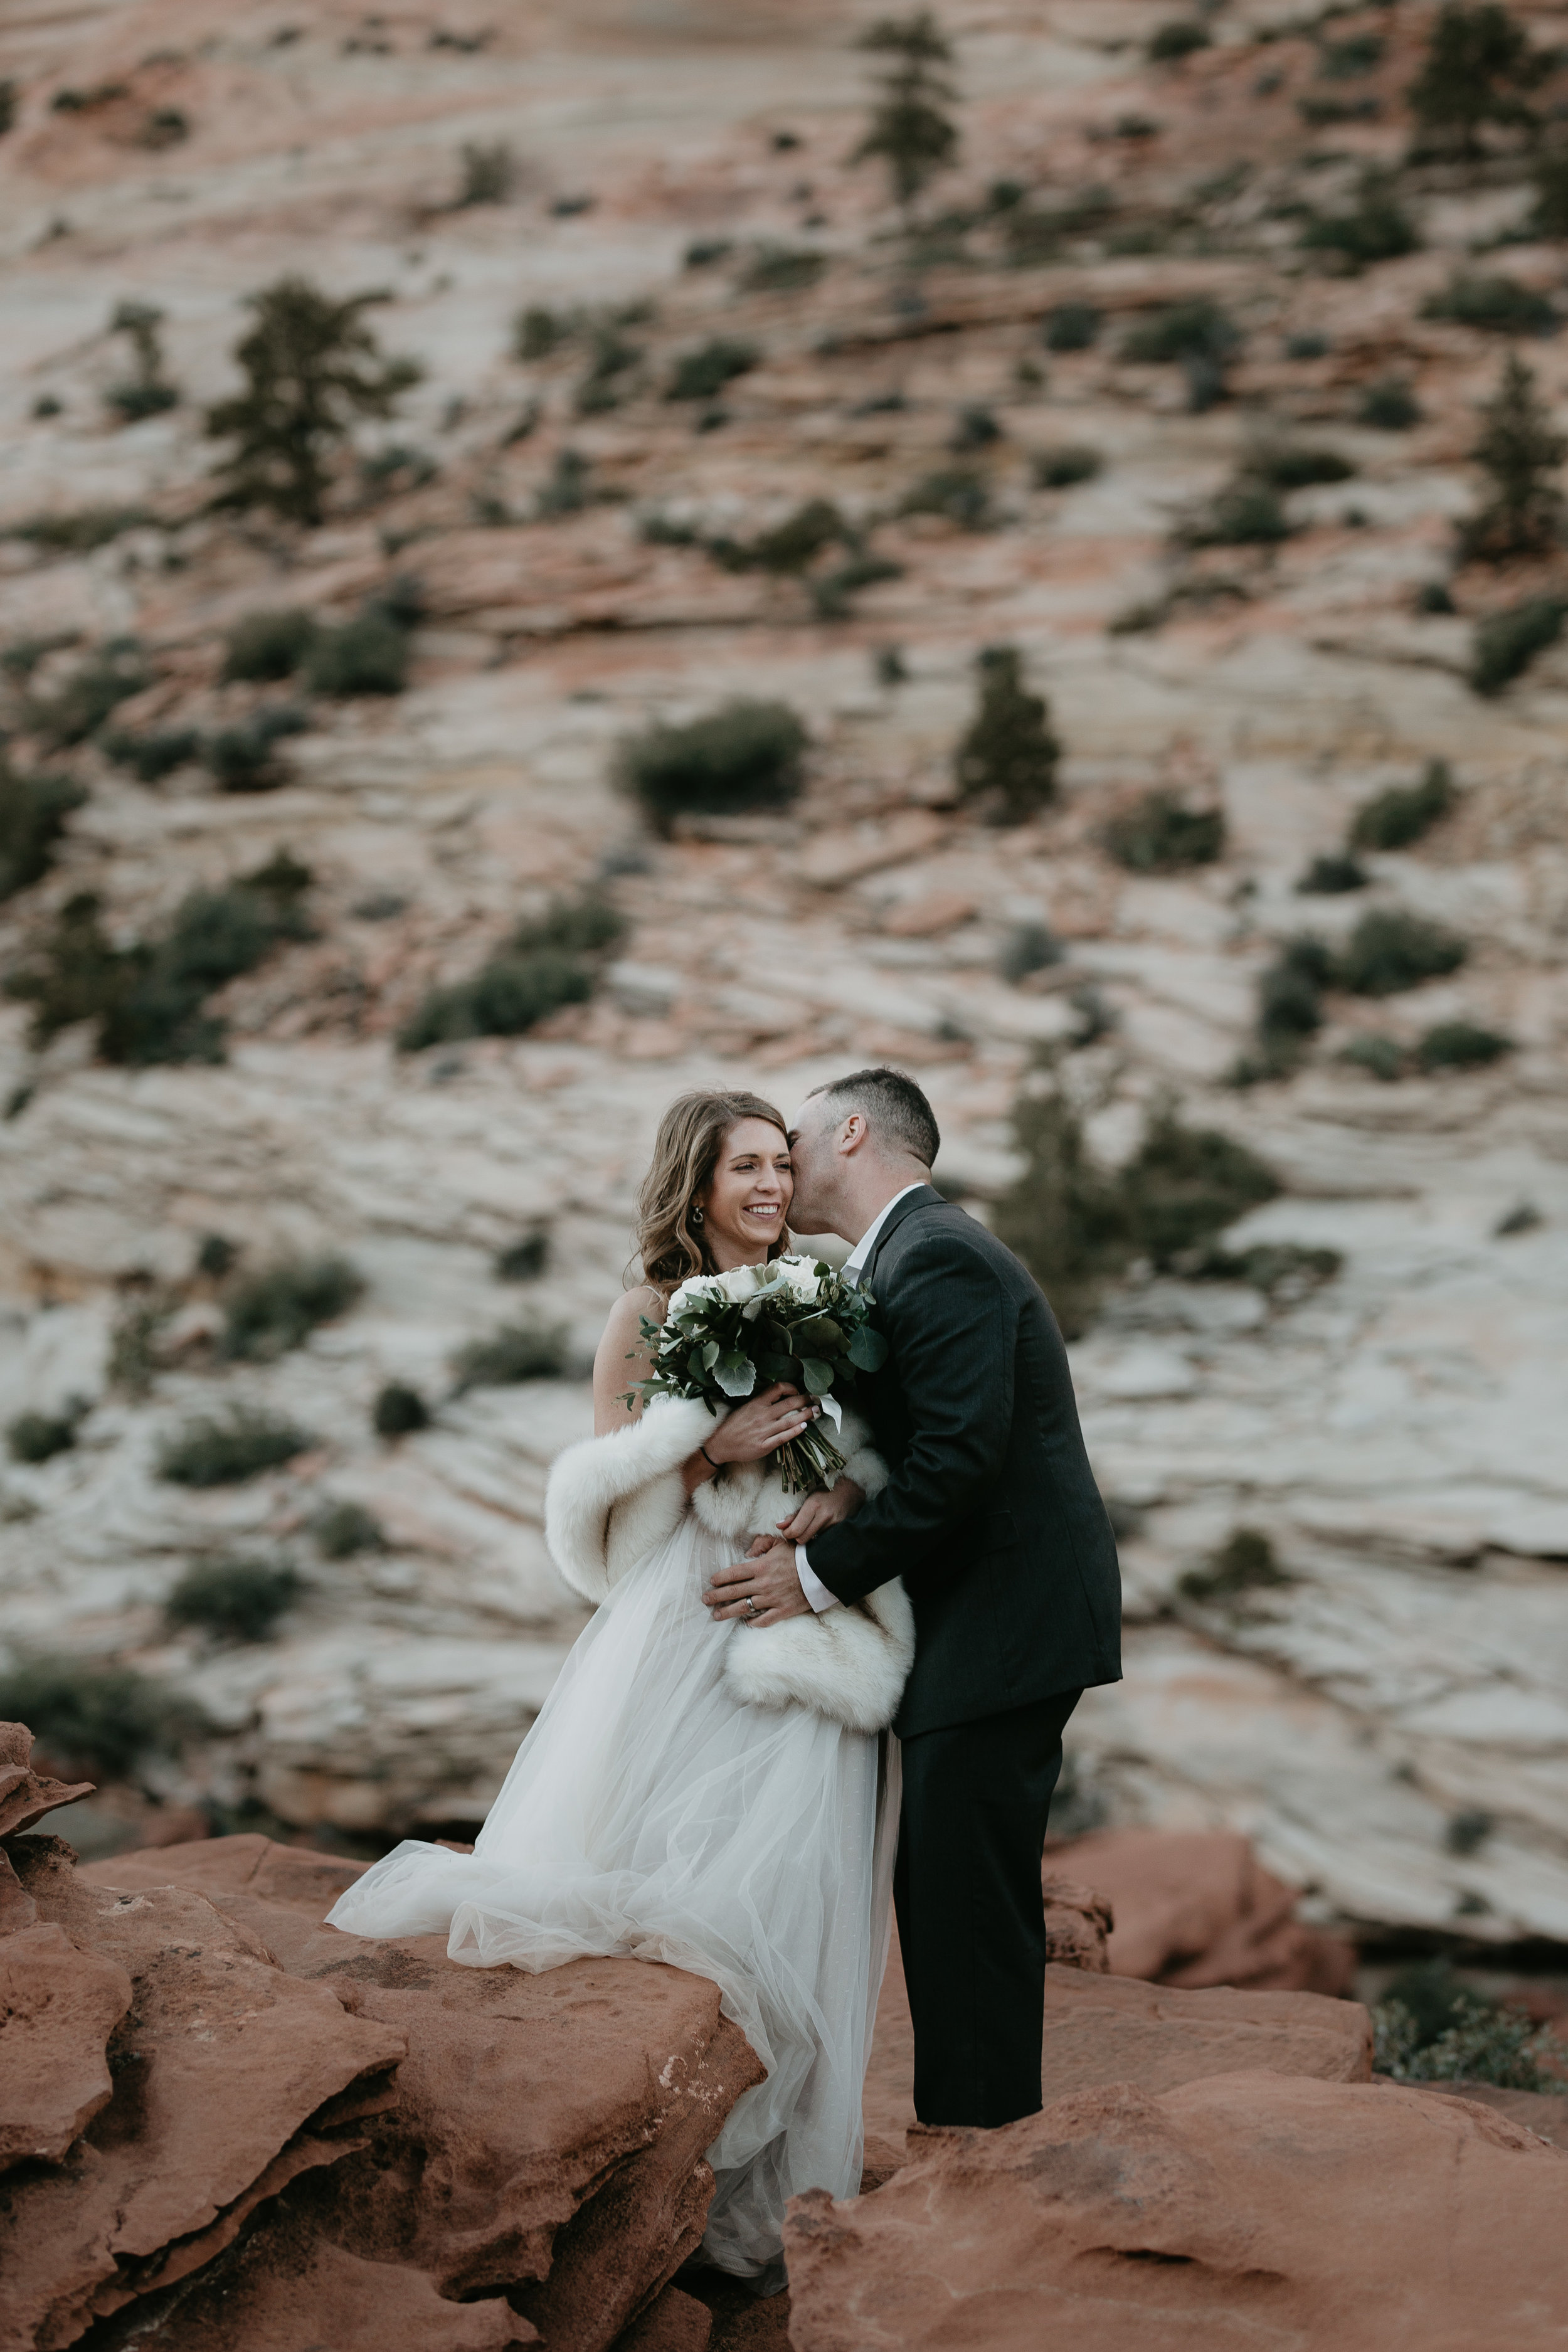 nicole-daacke-photography-zion-national-park-elopement-photographer-canyon-overlook-trail-elope-hiking-adventure-wedding-photos-fall-utah-red-rock-canyon-stgeorge-eloping-photographer-73.jpg